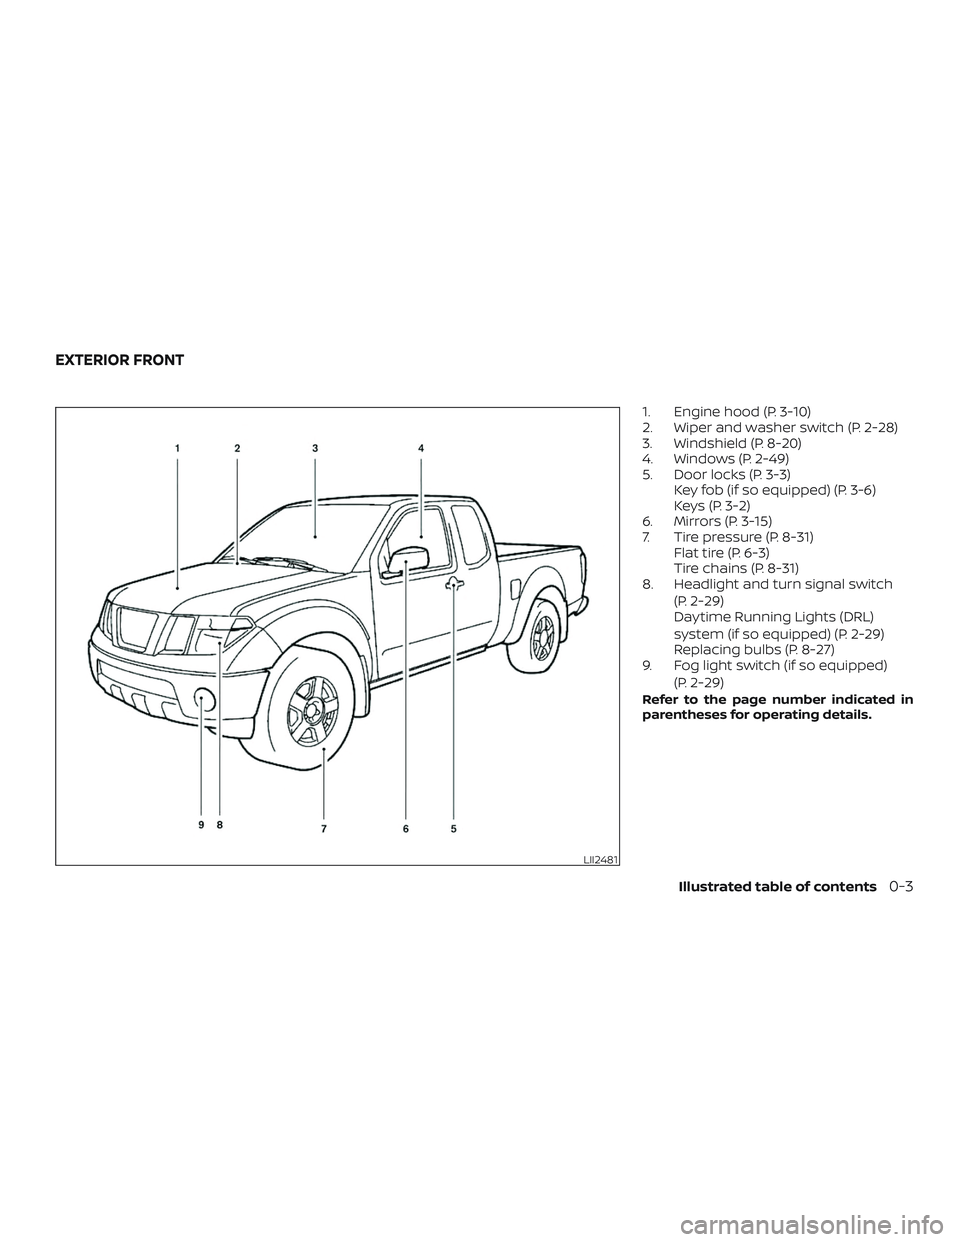 NISSAN FRONTIER 2018  Owner´s Manual 1. Engine hood (P. 3-10)
2. Wiper and washer switch (P. 2-28)
3. Windshield (P. 8-20)
4. Windows (P. 2-49)
5. Door locks (P. 3-3)Key fob (if so equipped) (P. 3-6)
Keys (P. 3-2)
6. Mirrors (P. 3-15)
7.